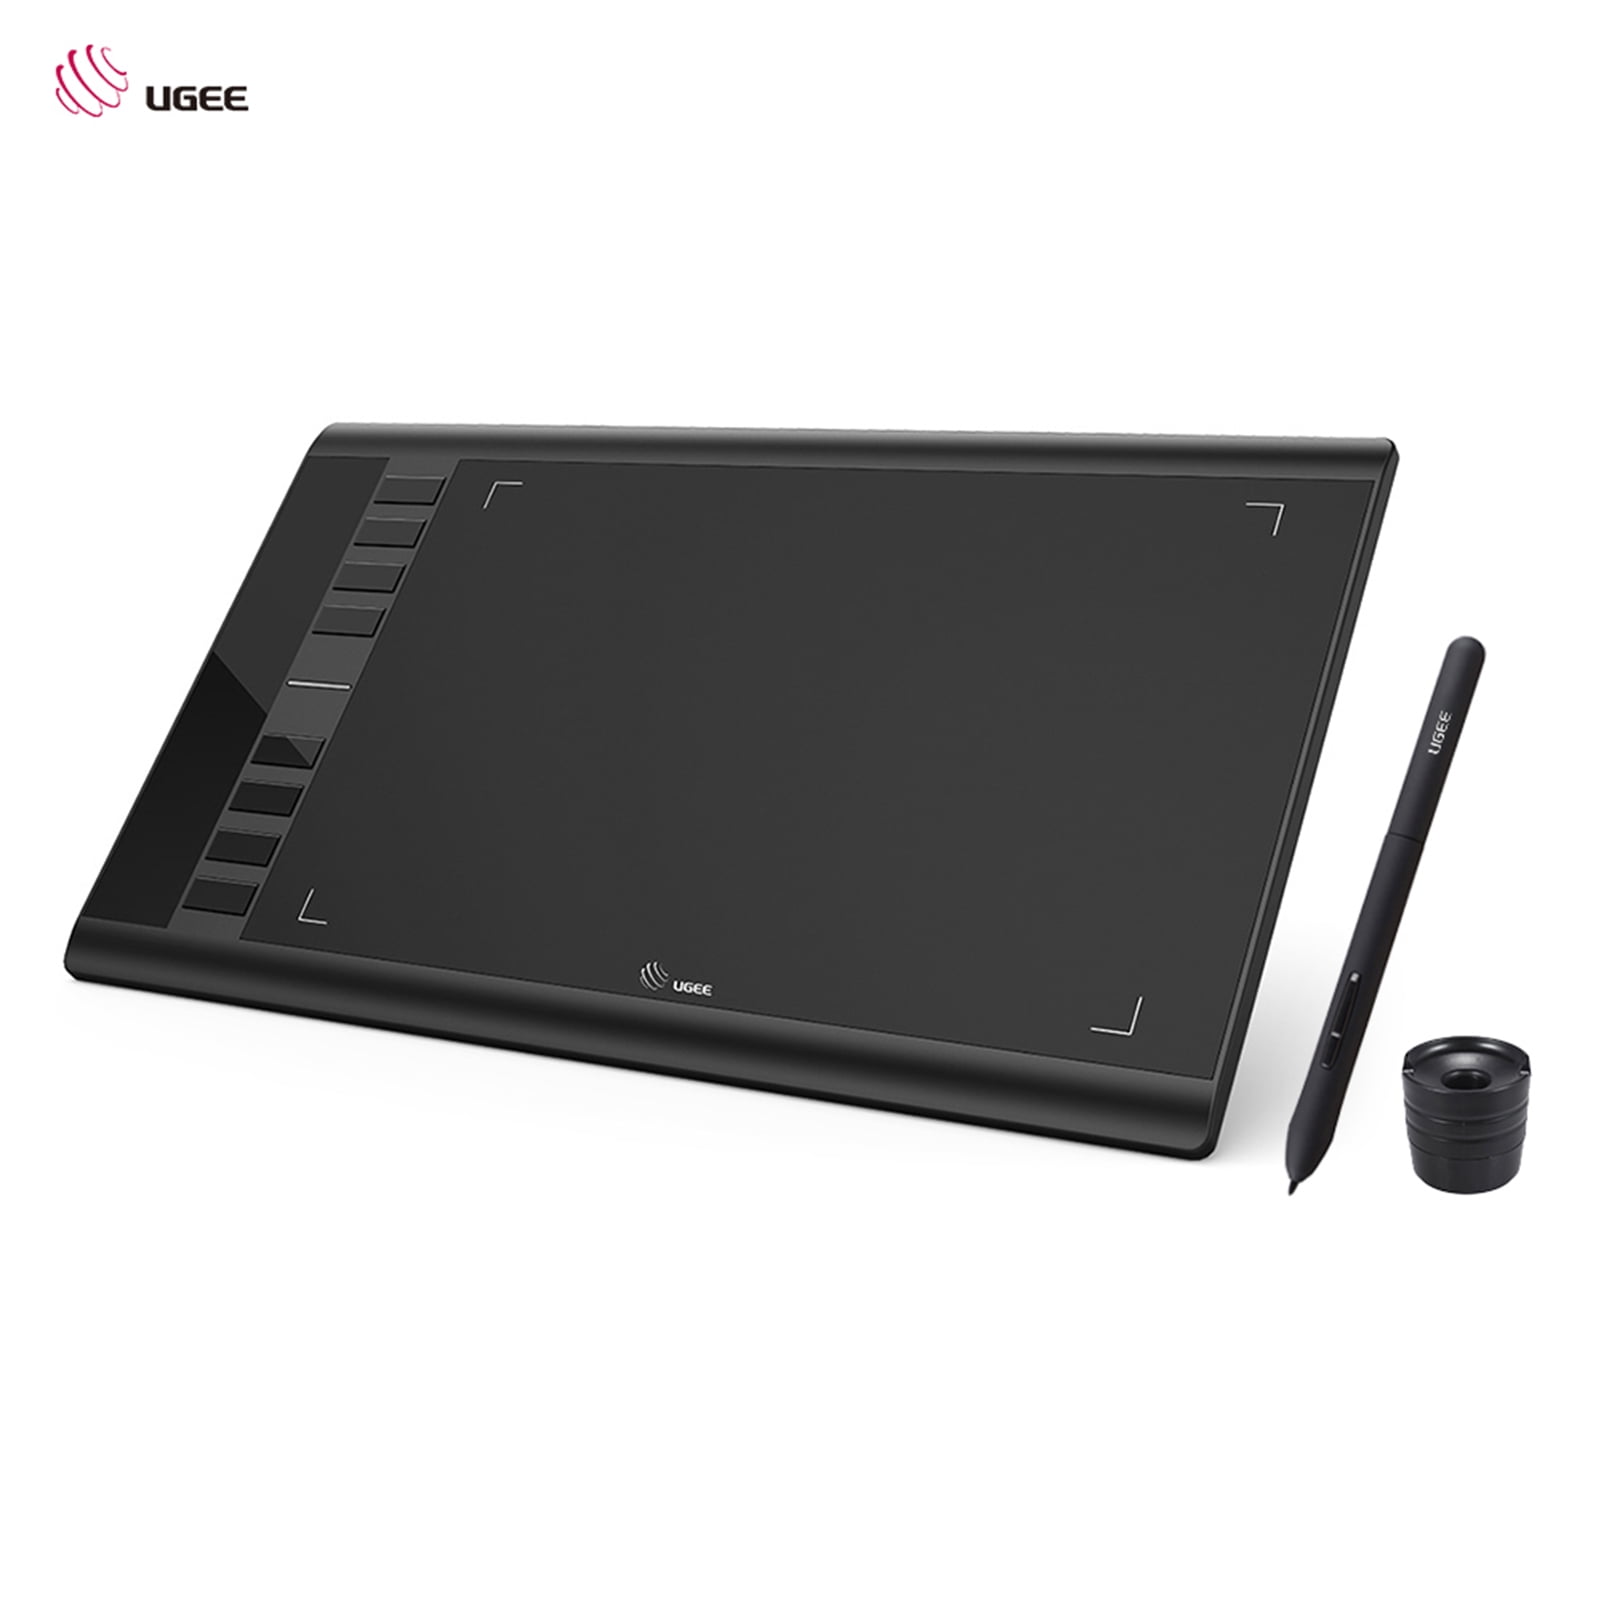 Ugee M708 Digital Graphics Art Design Drawing Painting Tablet Pad w/ Pen 